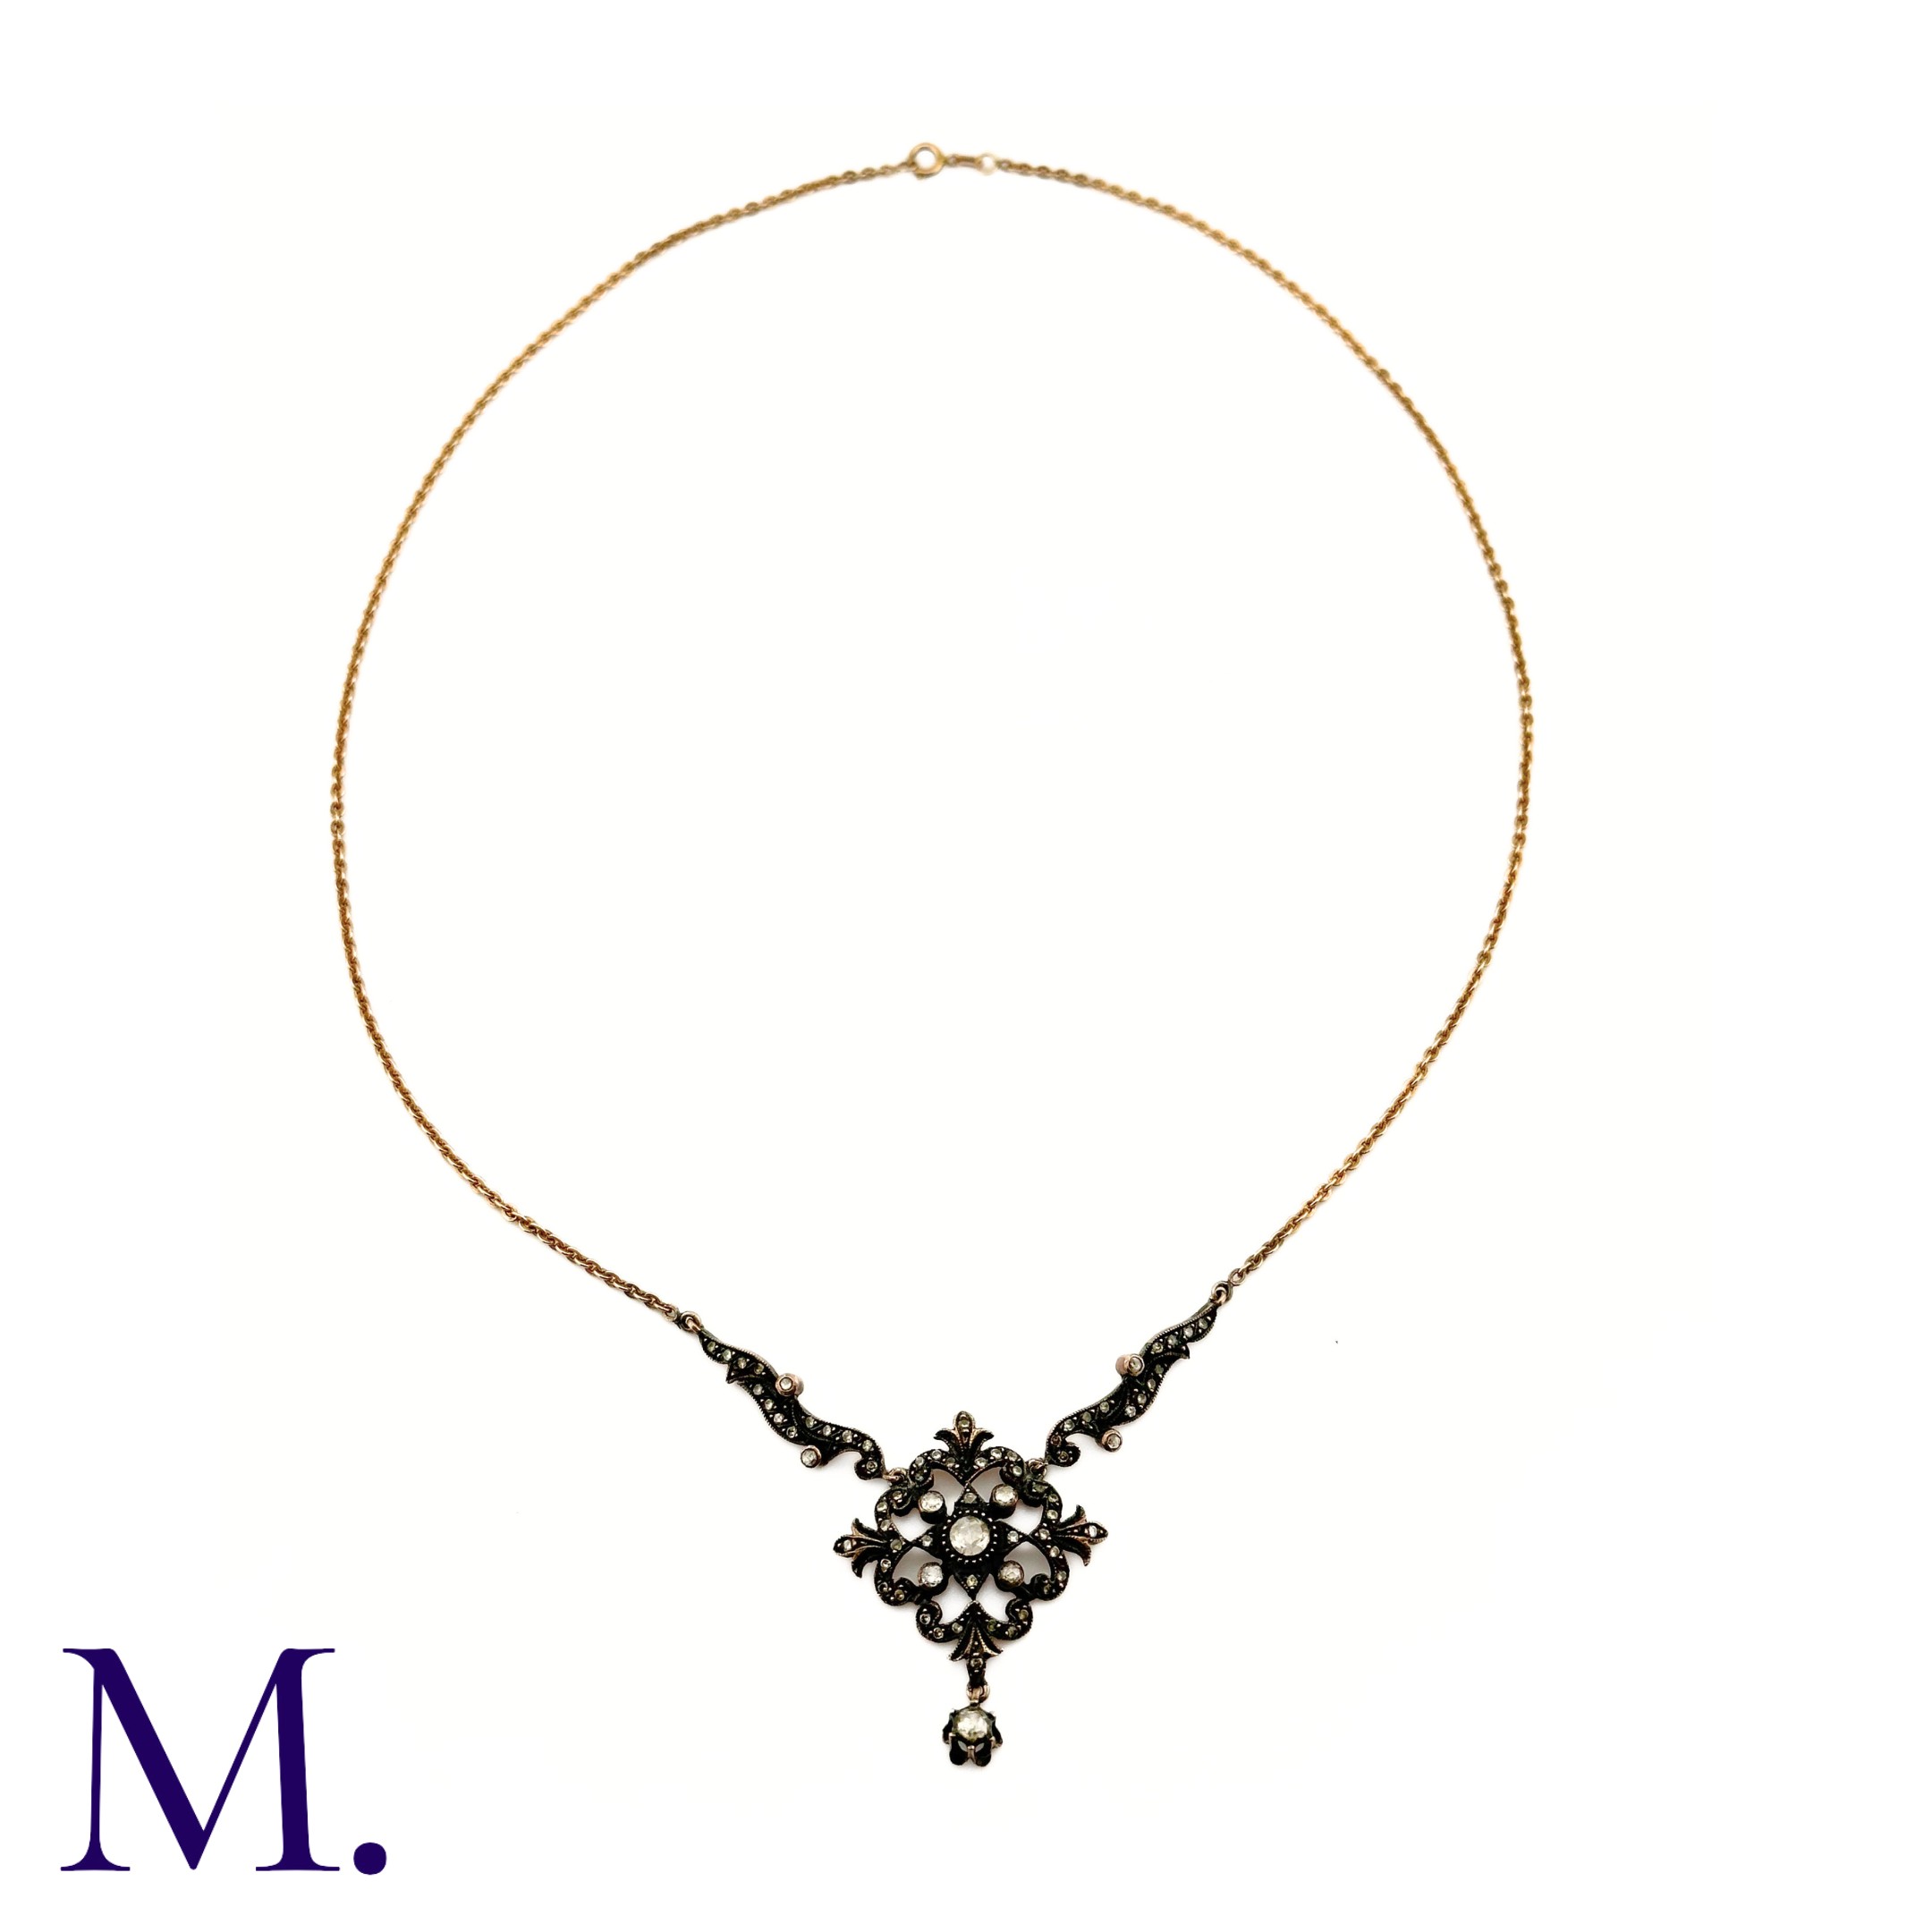 A Rose Diamond Necklace The rose diamond pendant hangs from a 48cm later 14ct gold chain. The - Image 2 of 4